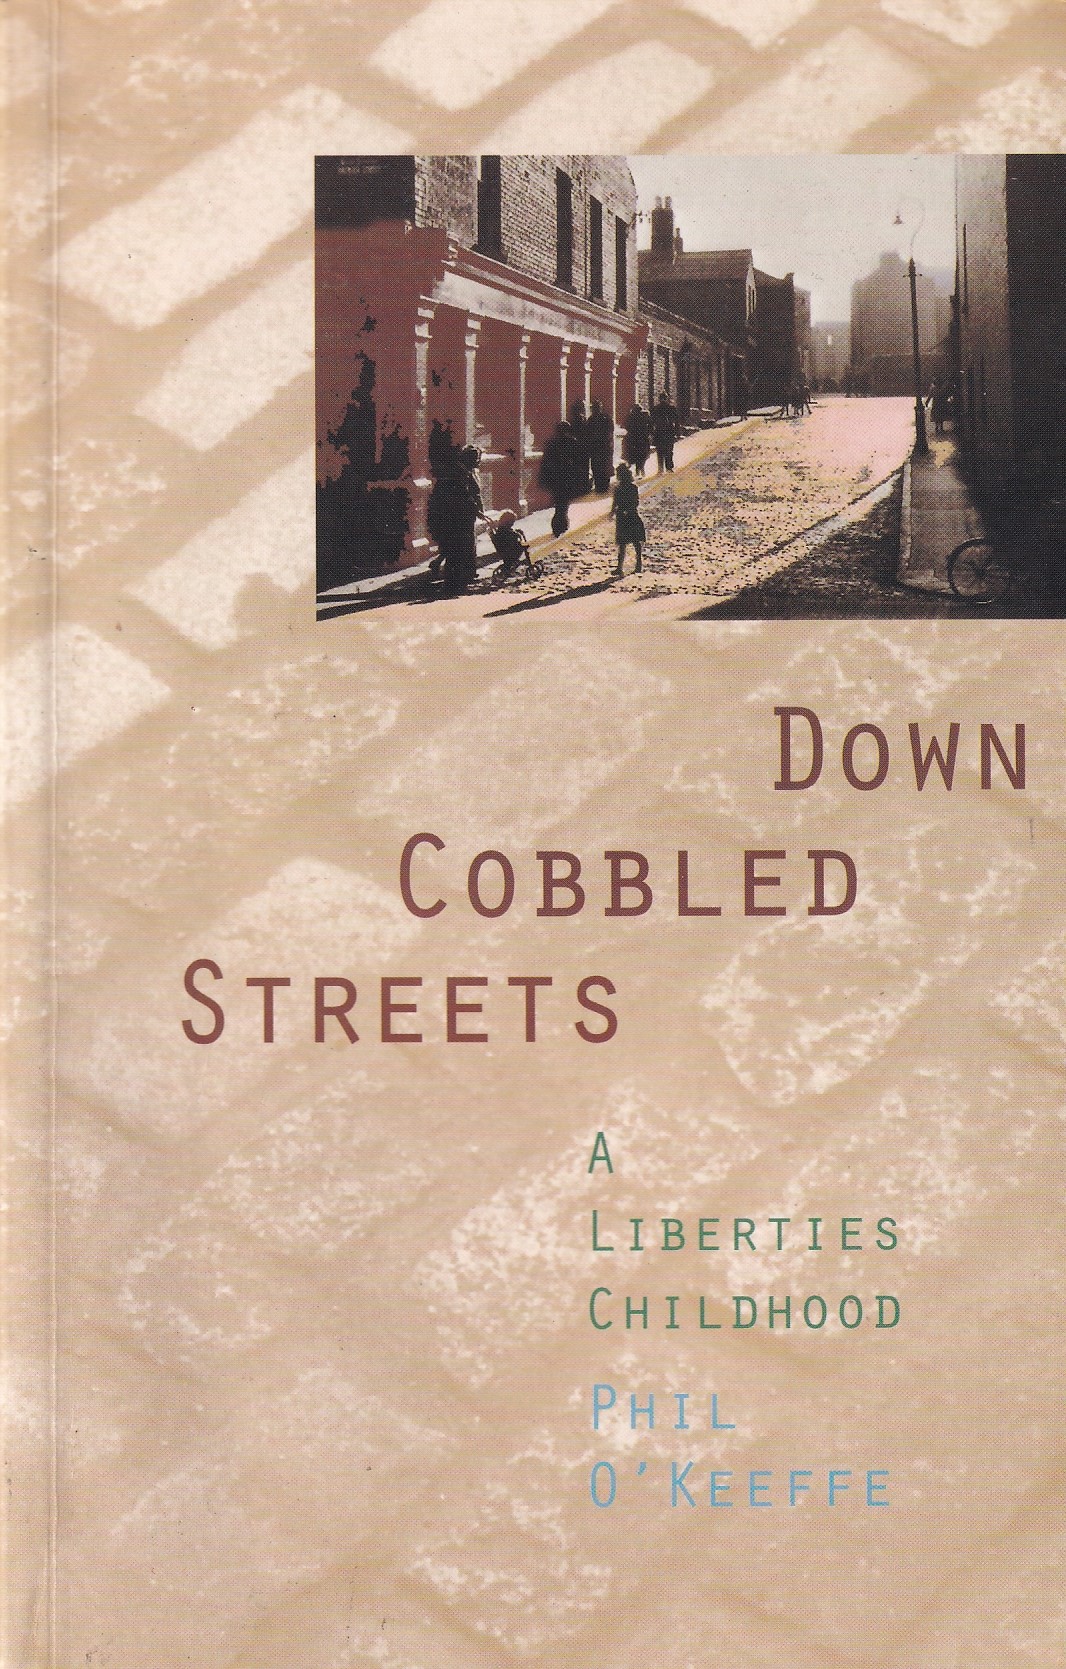 Down cobbled streets: A Liberties childhood (Signed) by O'Keeffe, Phil